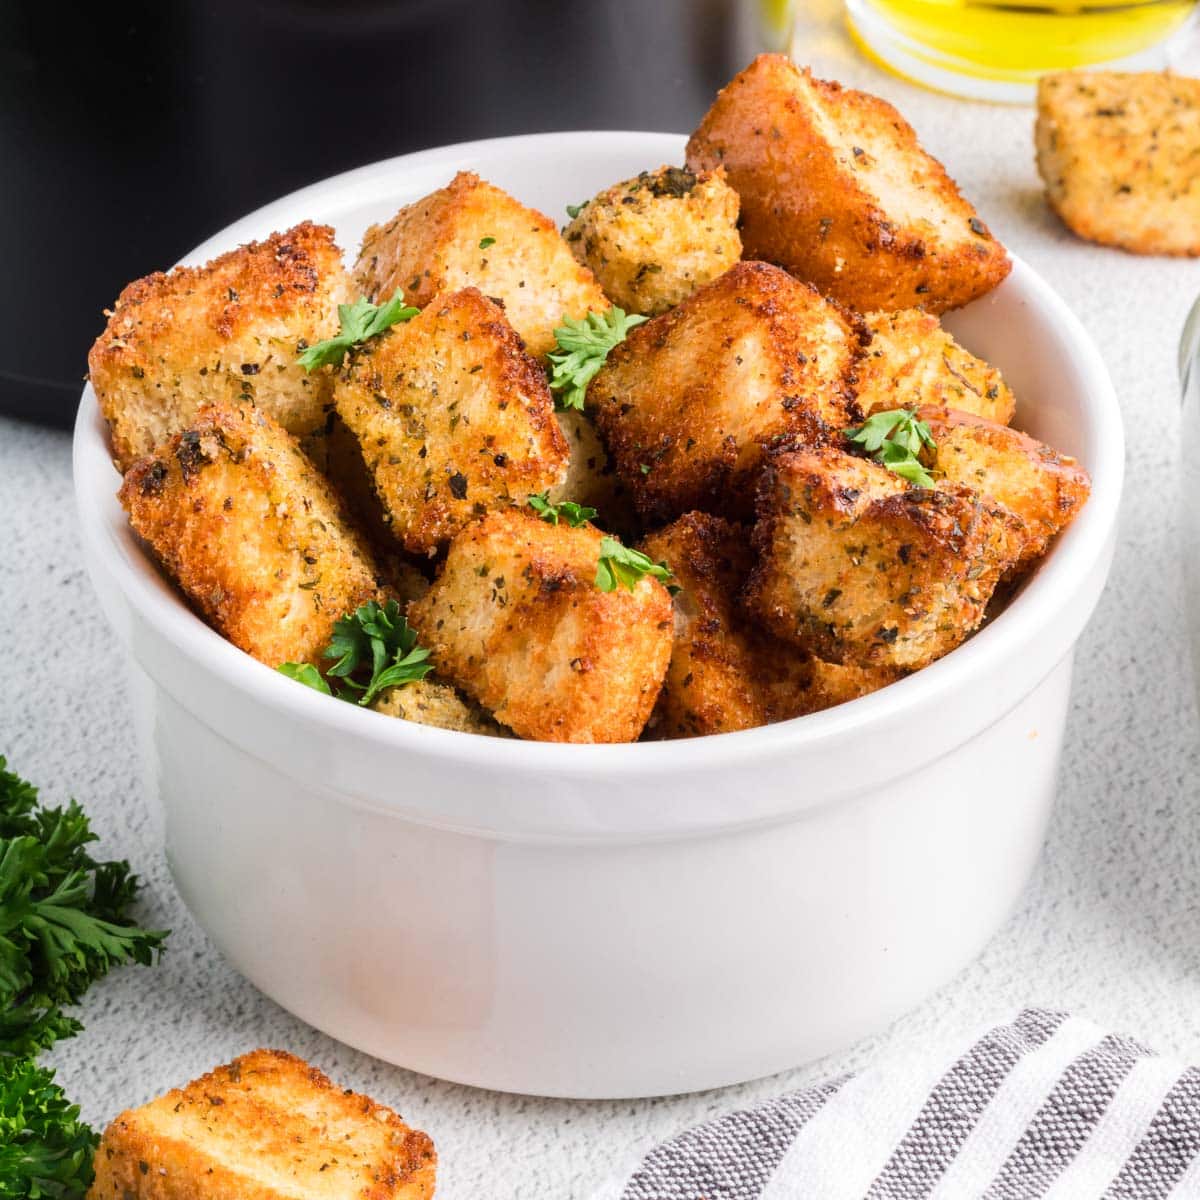 Homemade Croutons Recipe (Oven, Stovetop, Air Fryer)